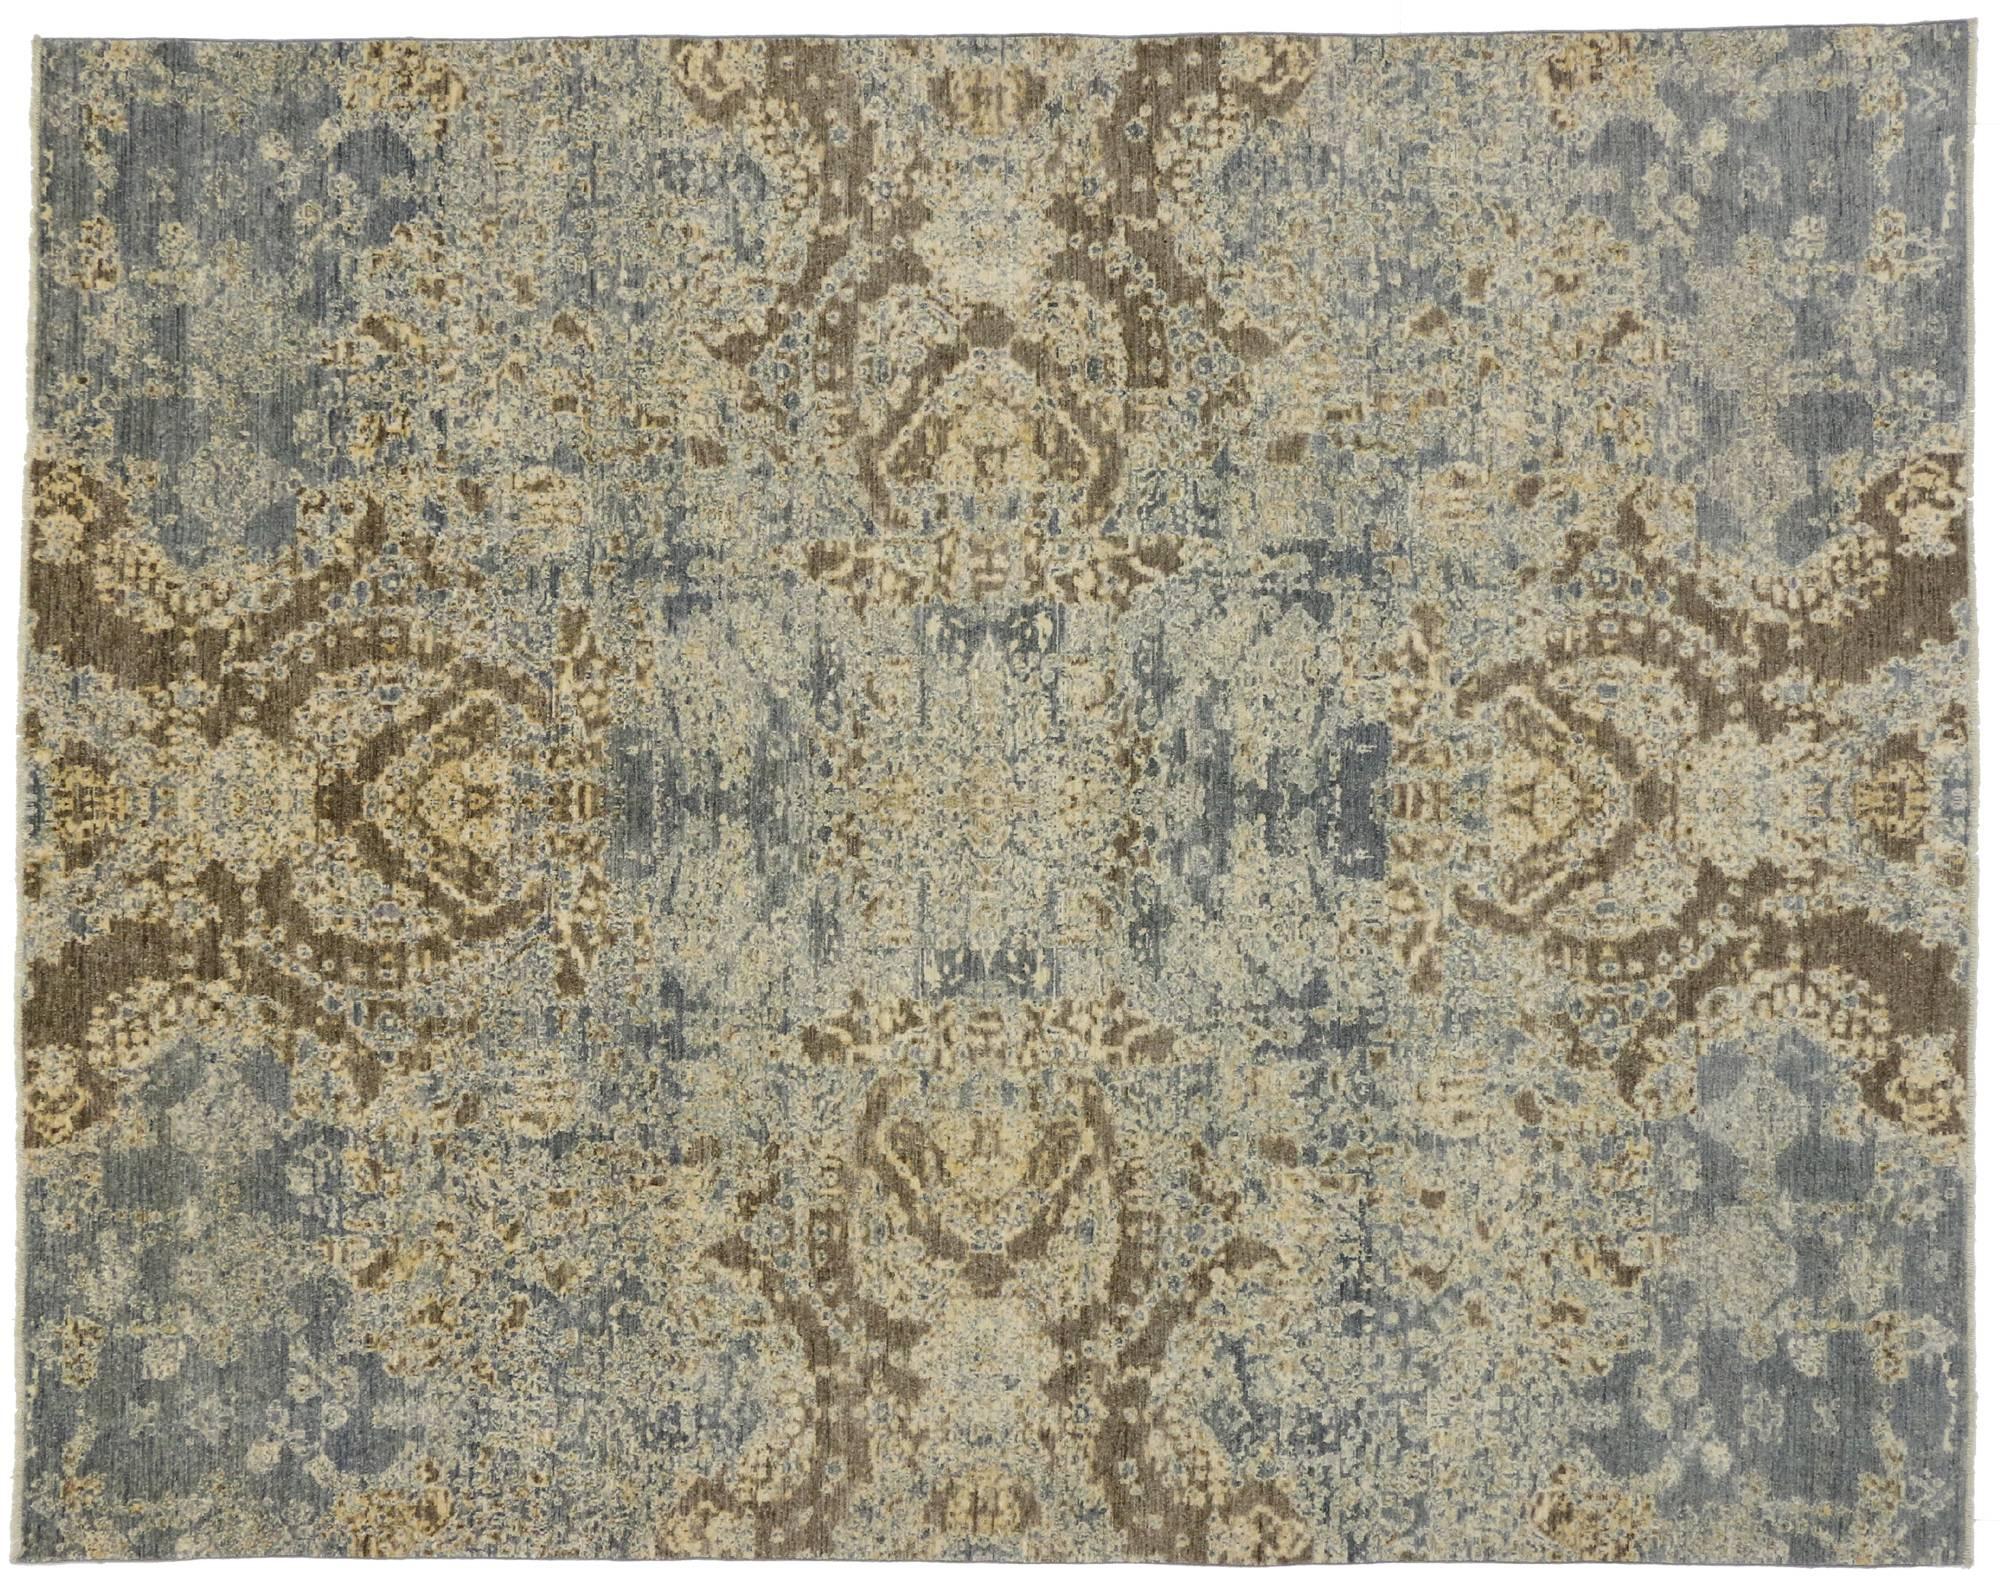 80228 New Transitional Area Rug with Contemporary Abstract Style and Coastal Colors. With contemporary abstract style and coastal colors, this hand-knotted wool transitional area rug complements today's interior design trends. This transitional area